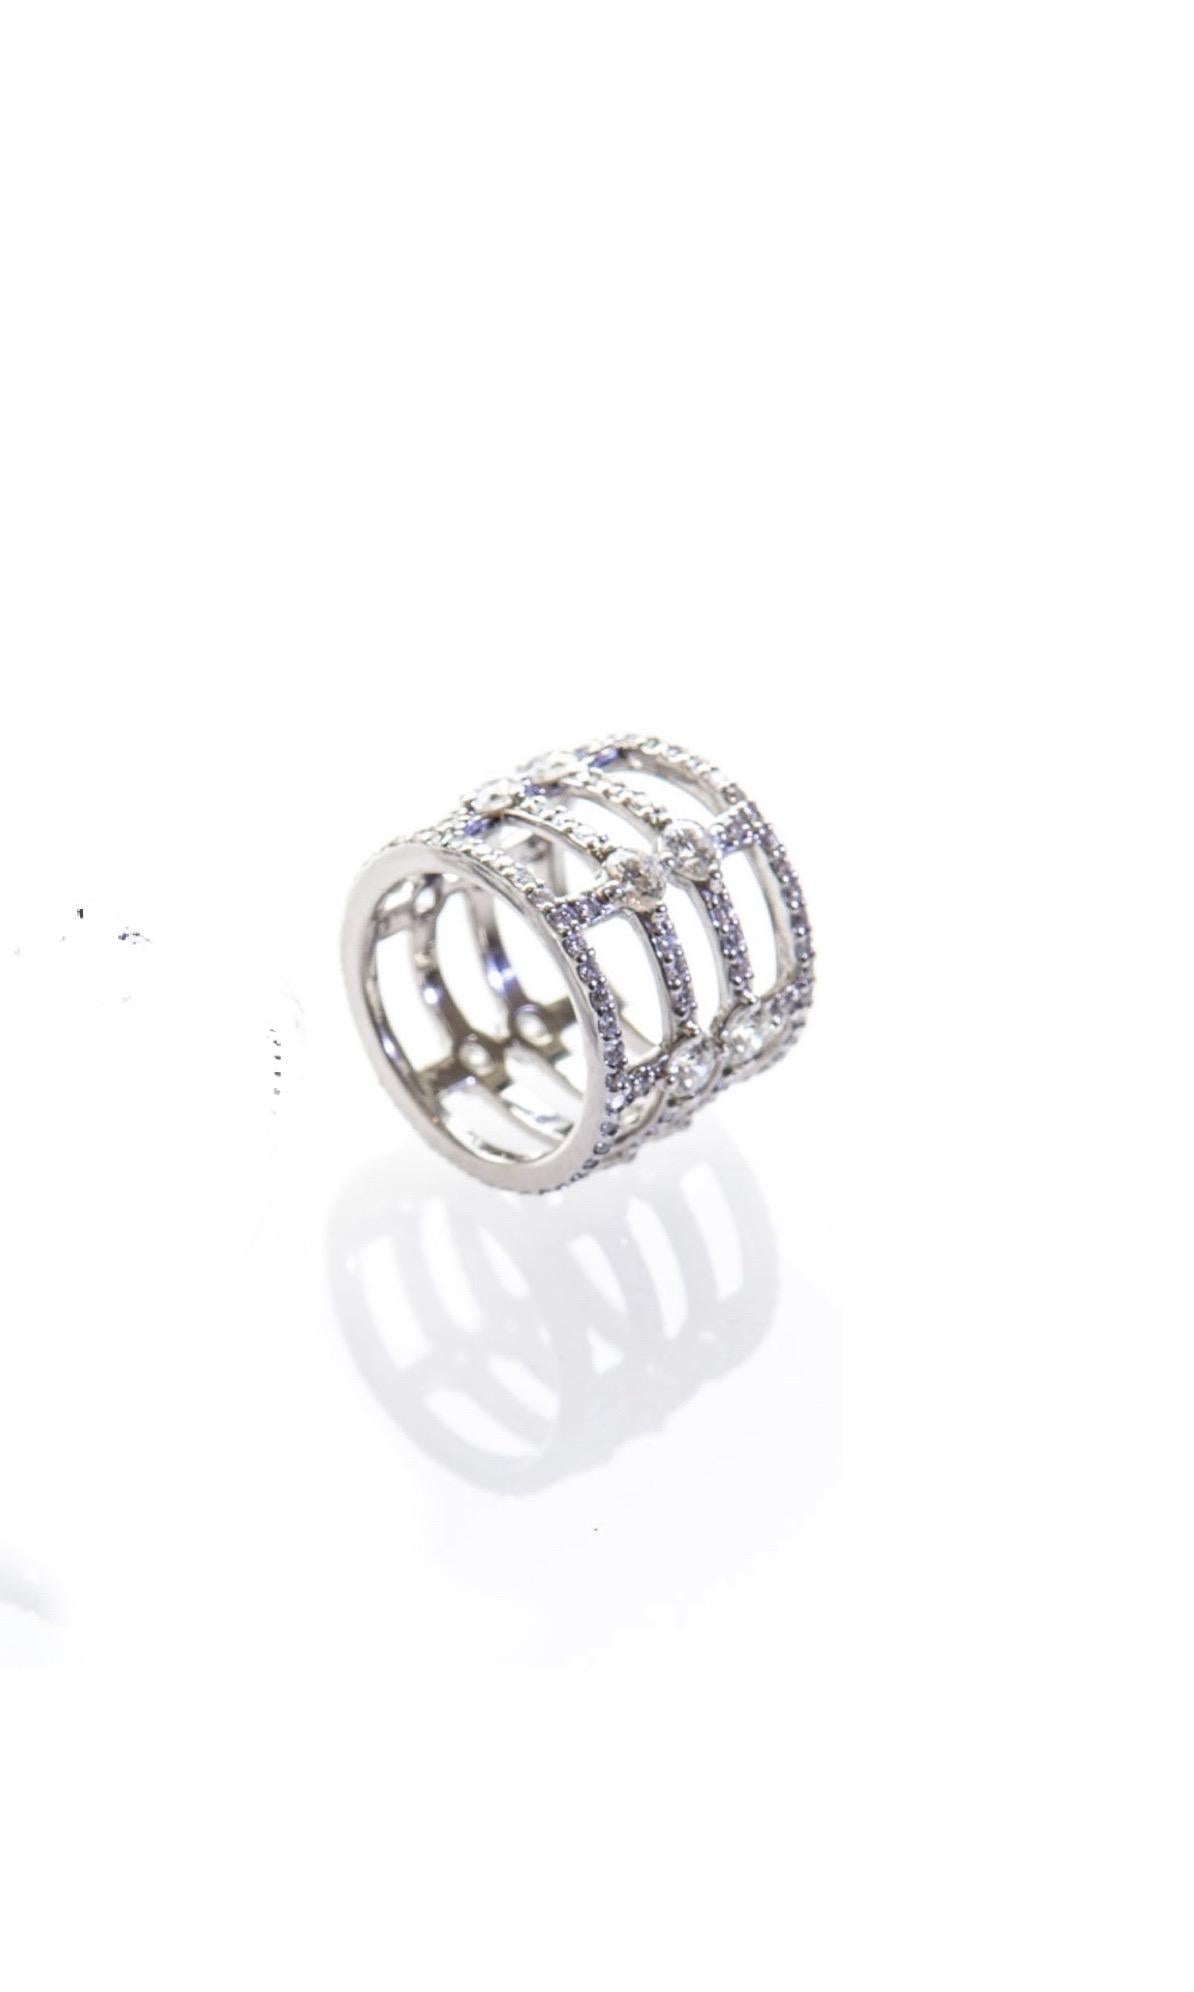 14k White Gold with White Diamonds 3.42tw

I was inspired by the iron fencing while on a tour in the garden district of New Orleans when I started designing my first collection.  You really get a feel of the Victorian styling.   I was equally